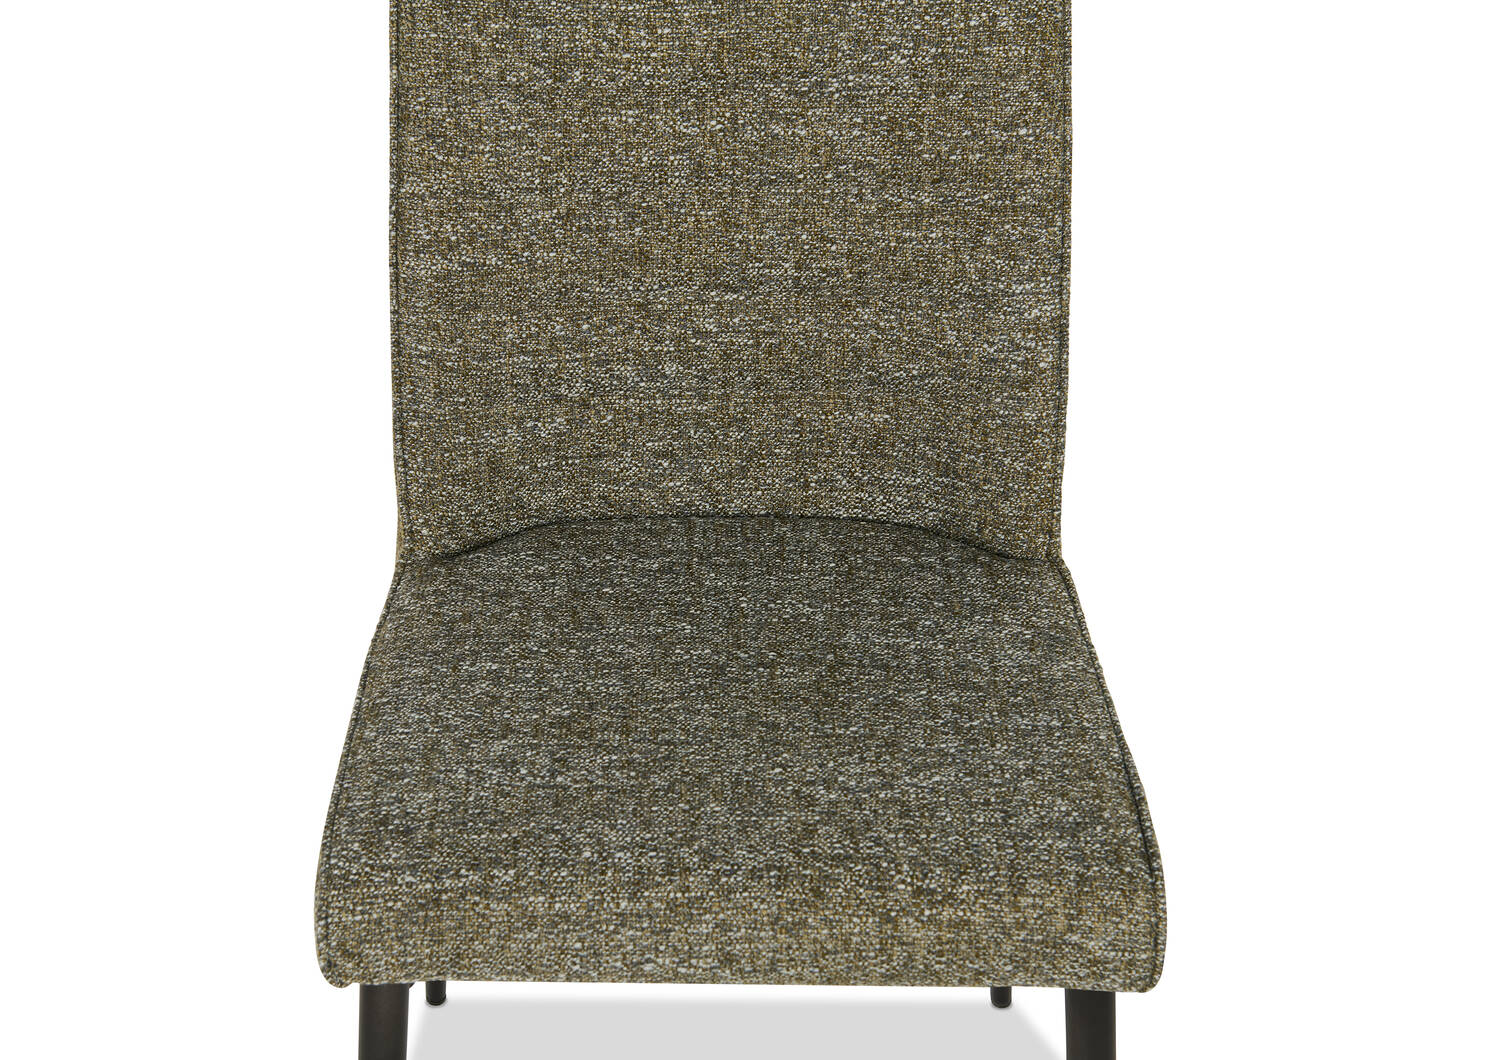 Pendrell Dining Chair -Nicco Olive